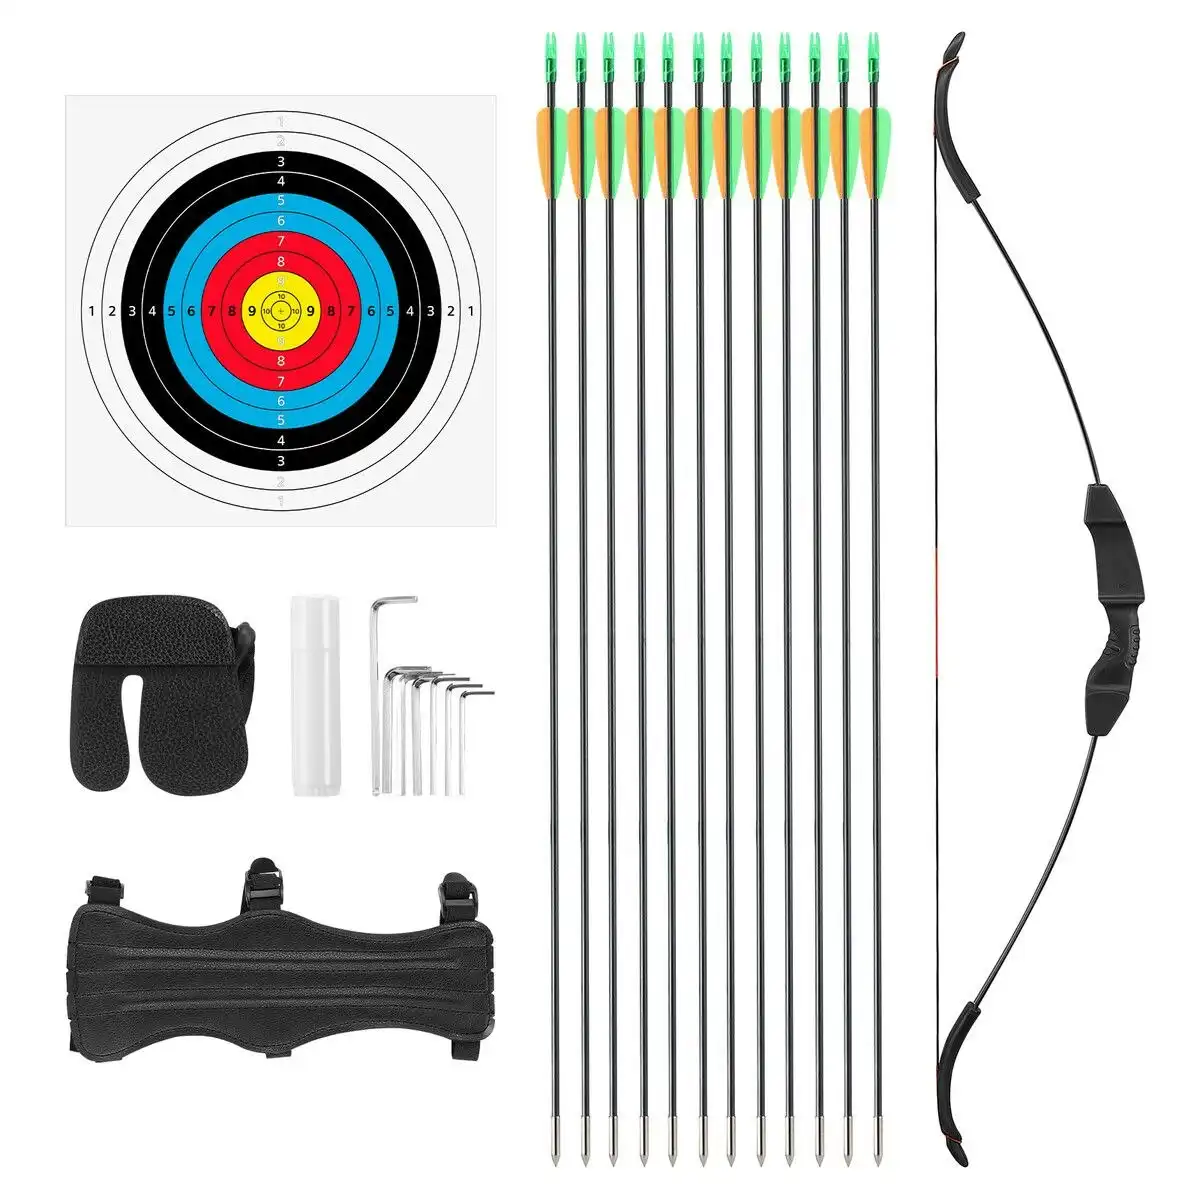 Ausway 40lbs Recurve Bow Arrow Set Sports Archery Outdoor Hunting Equipment Target Shooting 40lbs Left Right Handed Black